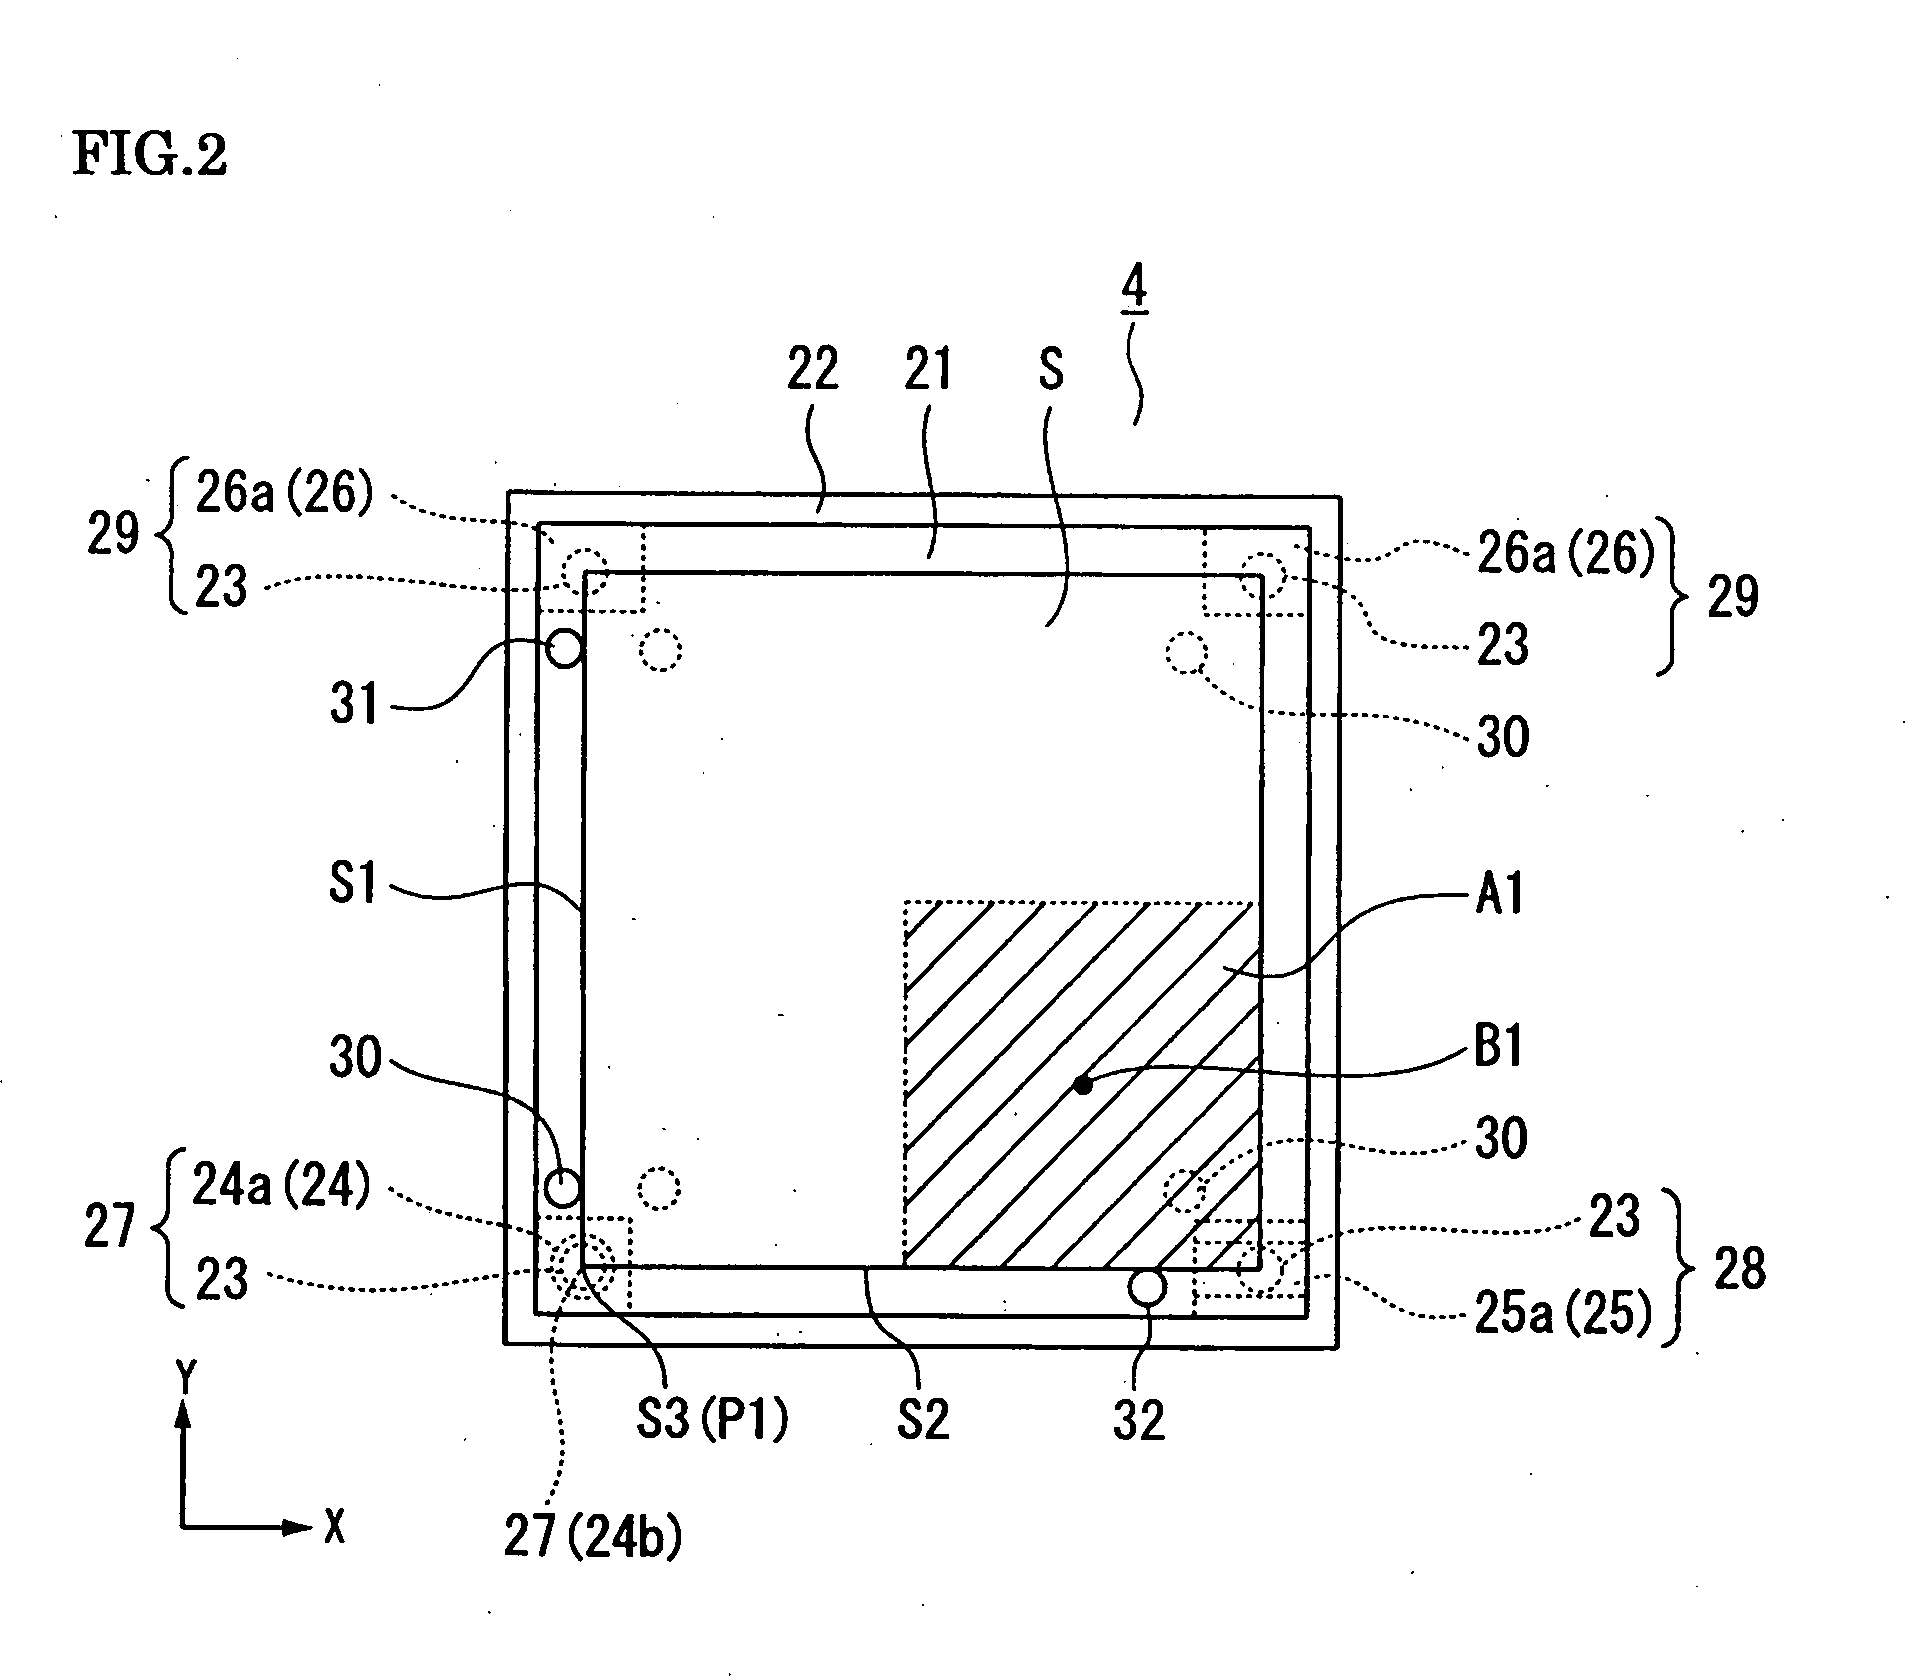 Sample holding mechanism and sample working/observing apparatus